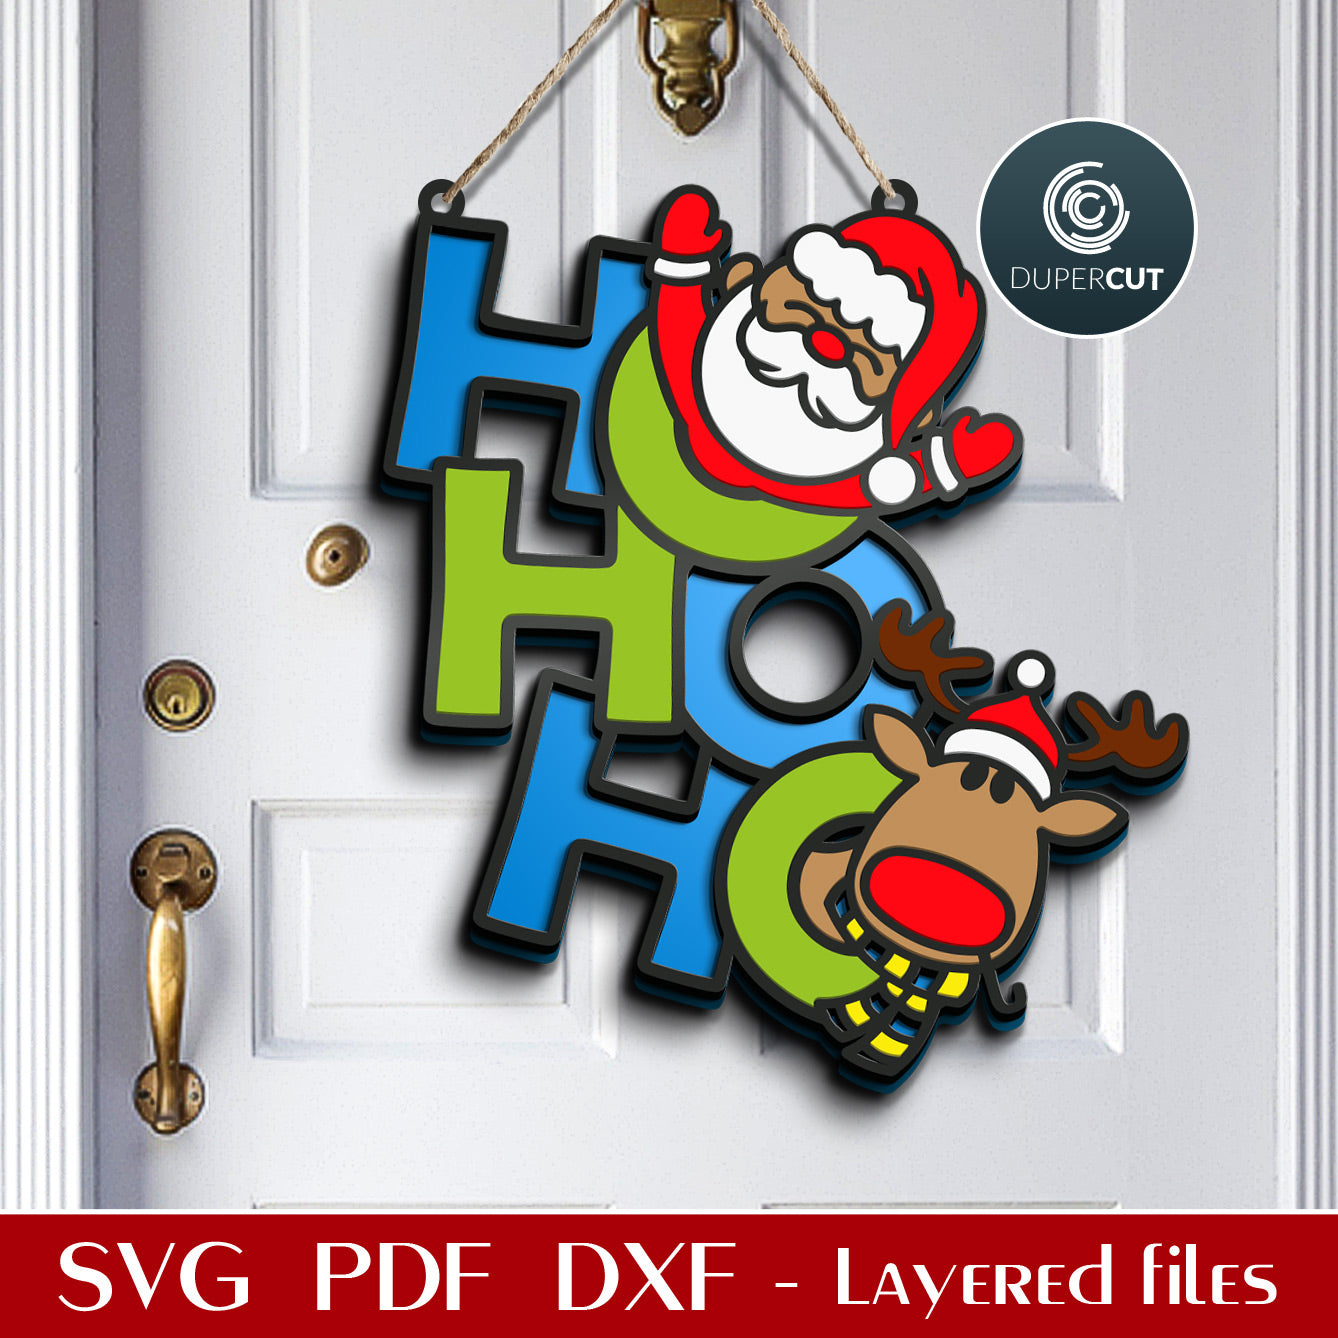 Waving Santa holiday door hanger sign HO-HO-HO - SVG DXF layered vector files for laser cutting with Glowforge, Cricut, Silhouette Cameo, CNC plasma by DuperCut